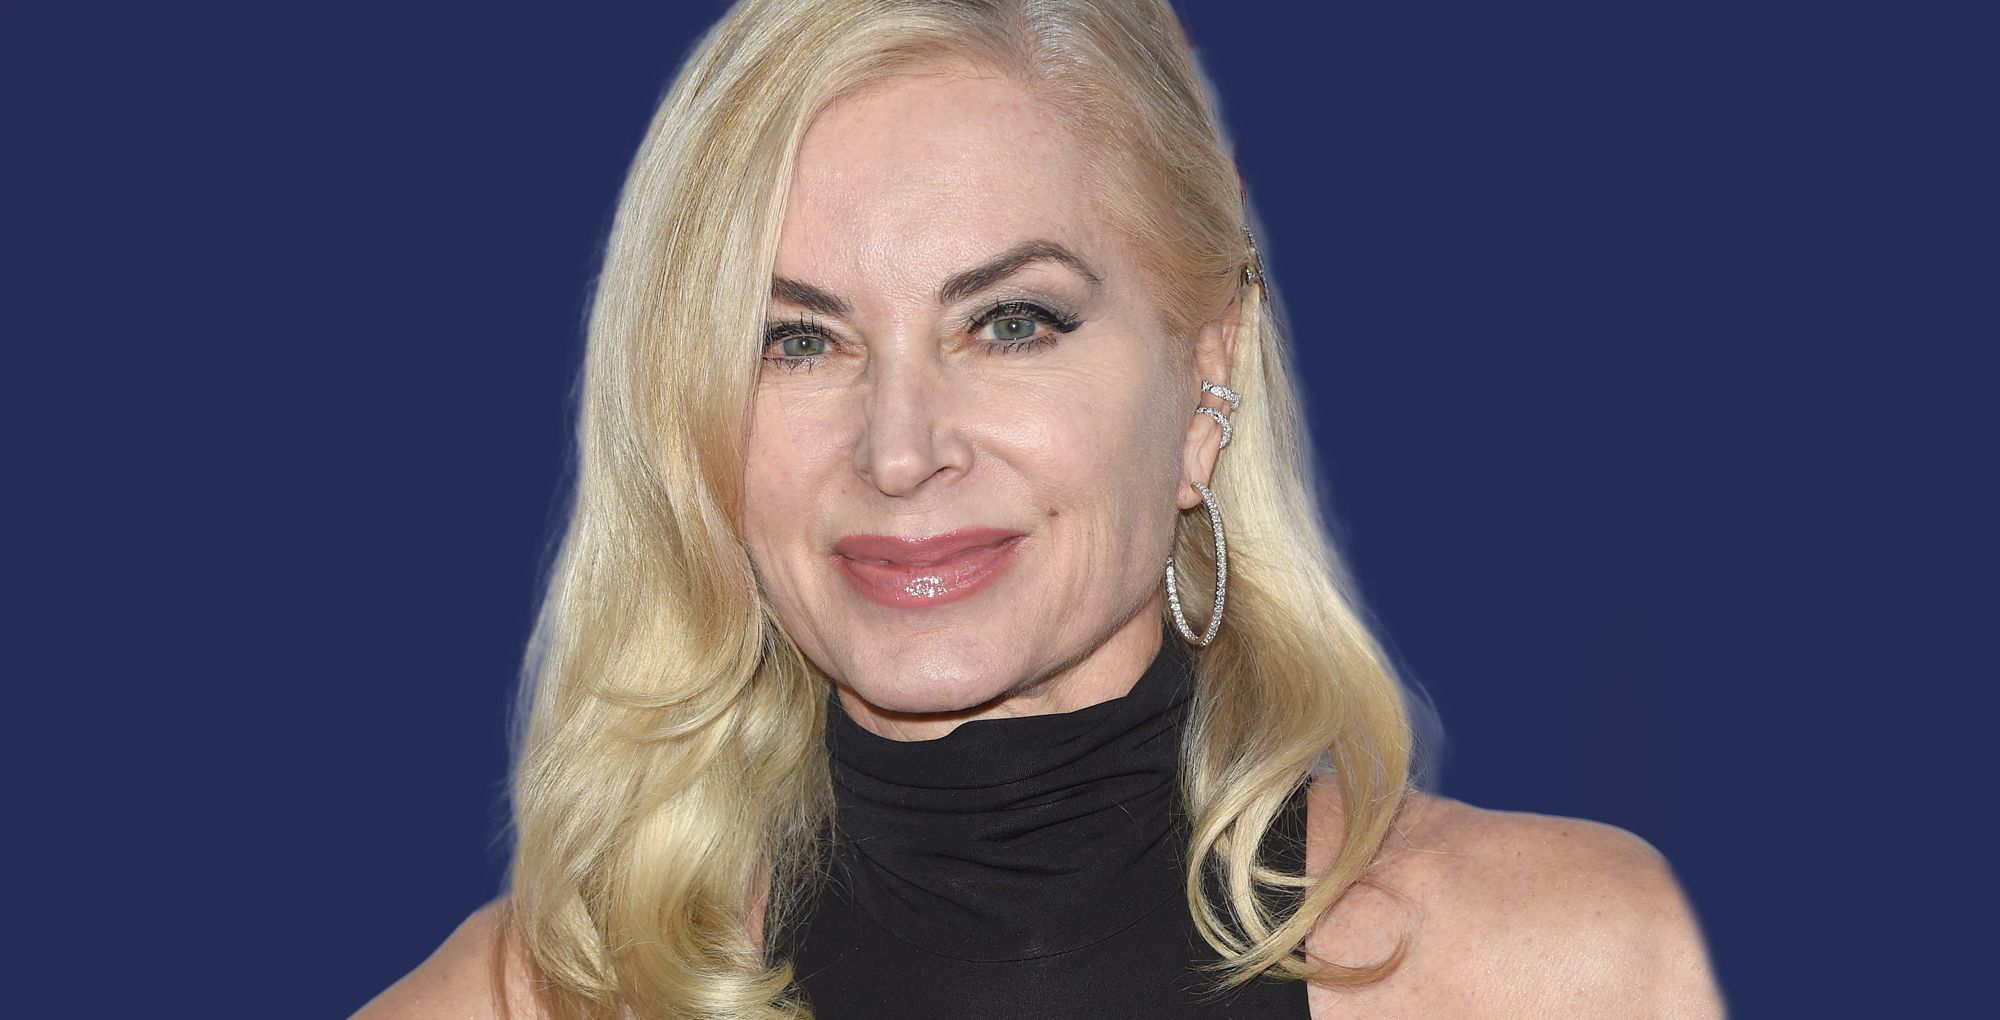 eileen davidson currently on young and the restless but also known on days of our lives.